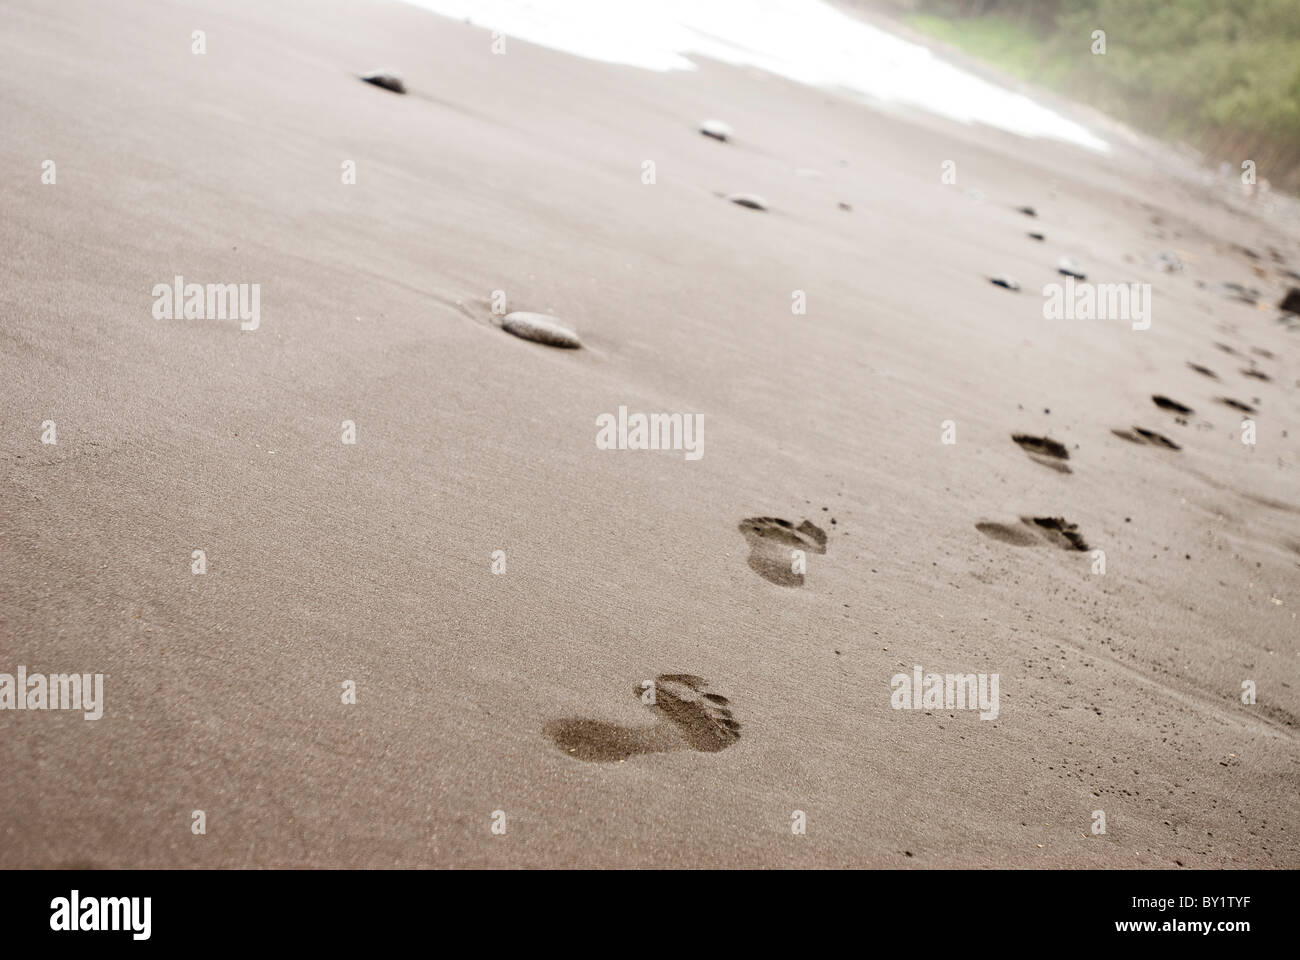 Footprints in sand at beach Banque D'Images